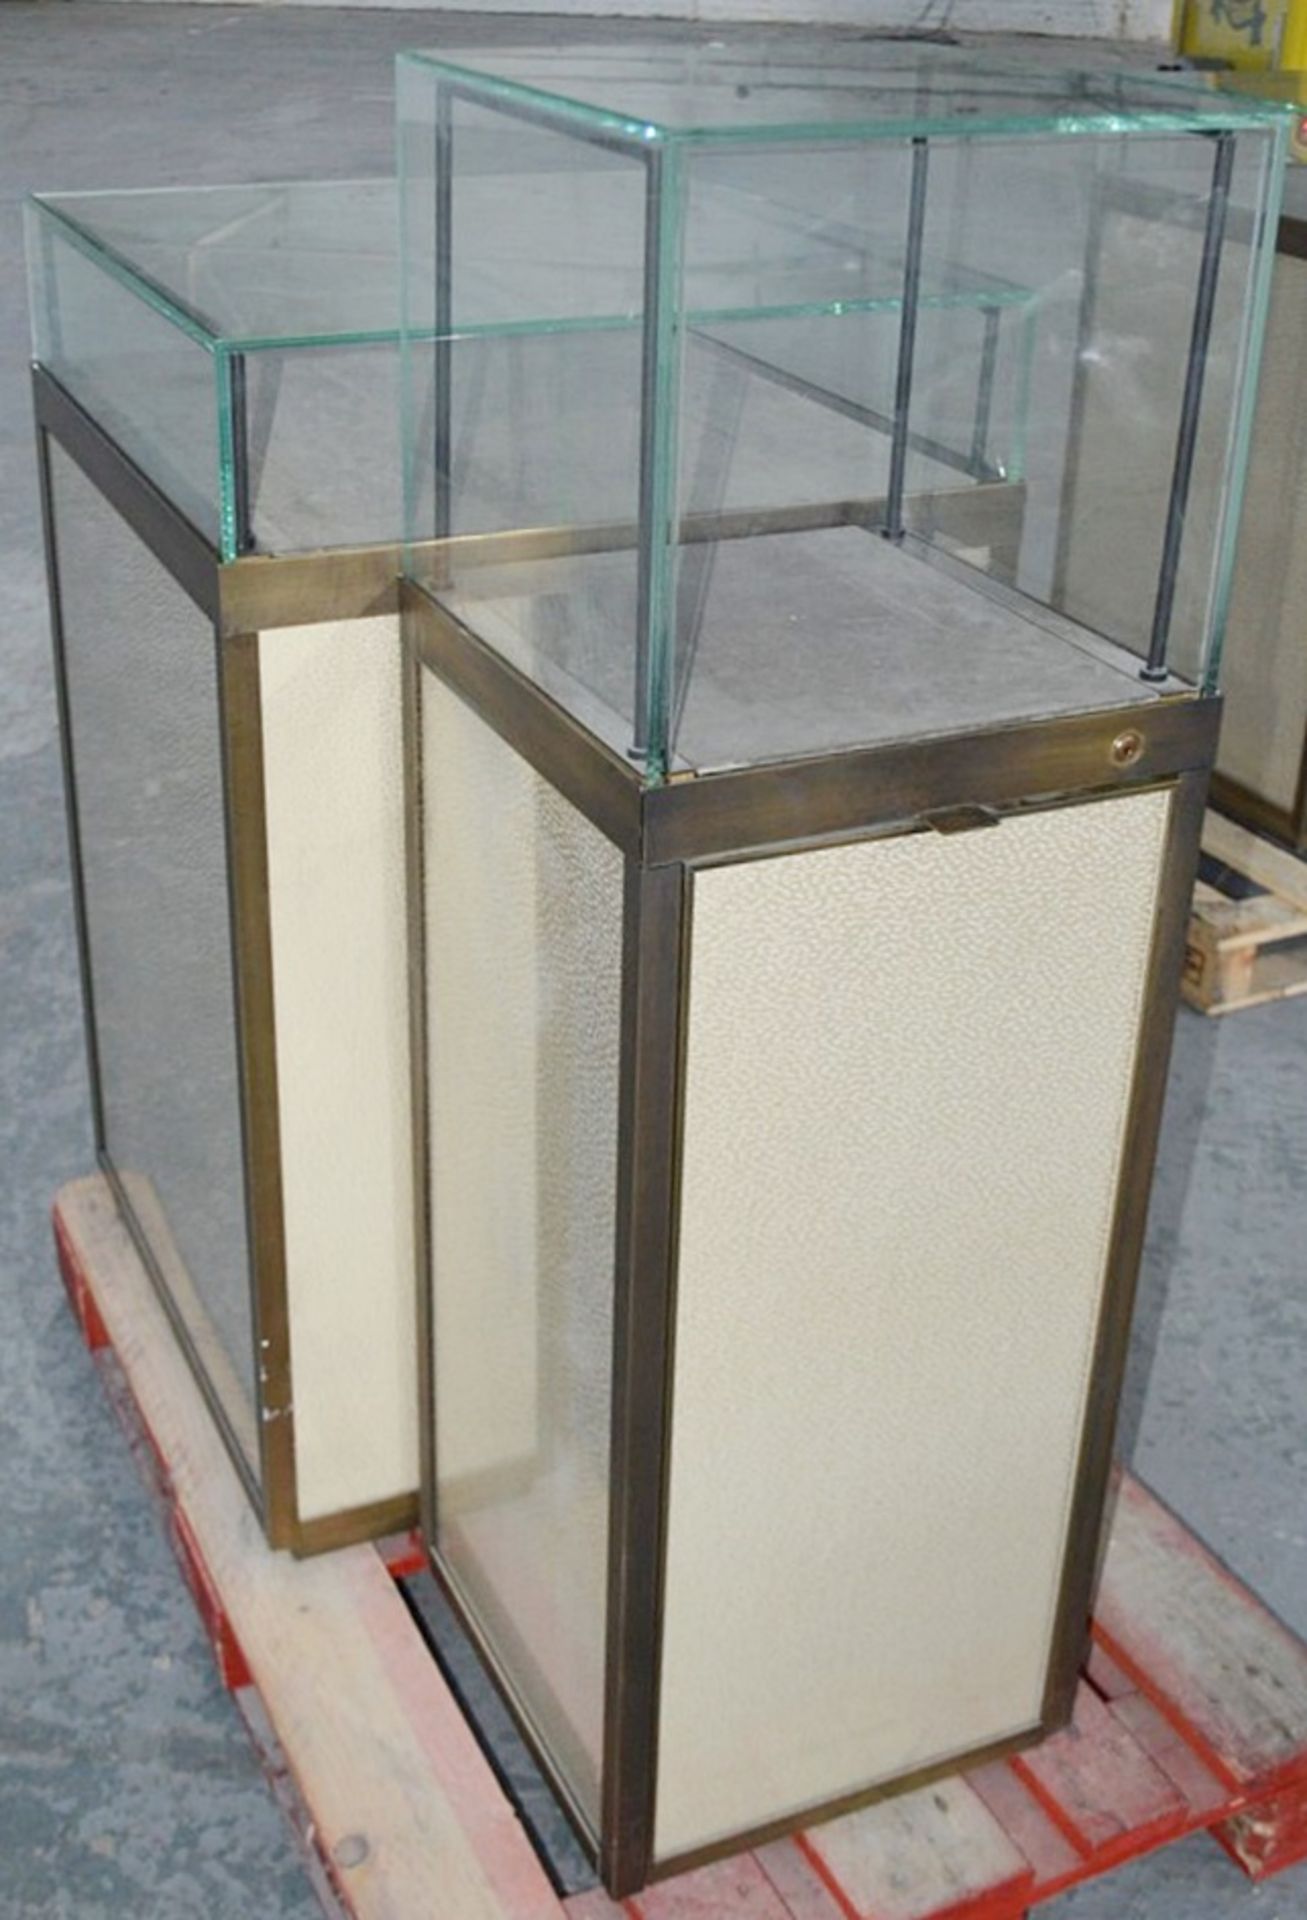 1 x Luxury Double Cabinet Glass Display Case - Dimensions: H124 x W100 x D65cm - Ex-Showroom Piece - Image 2 of 9